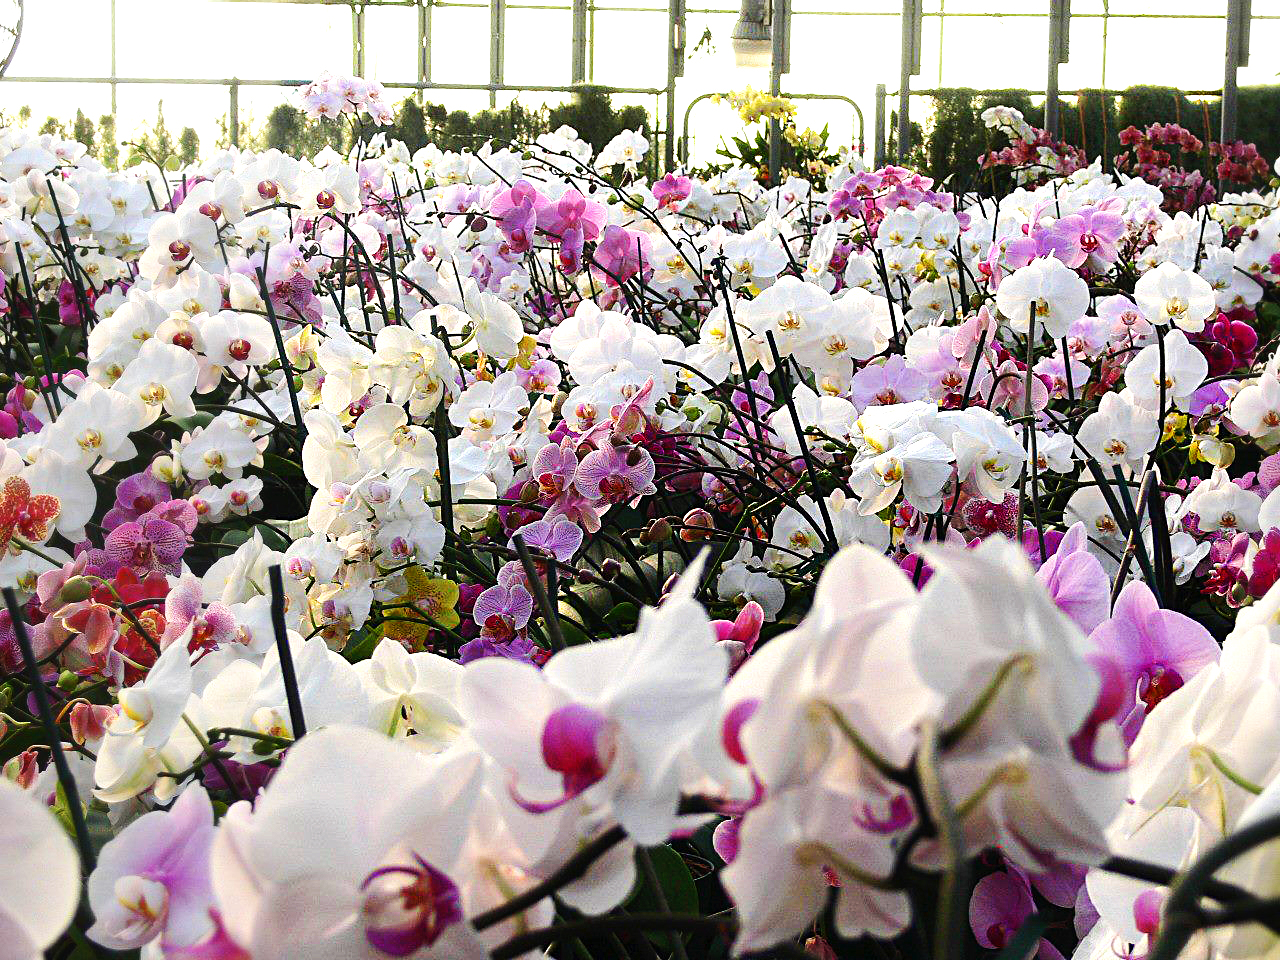 Thousands of blooming orchids